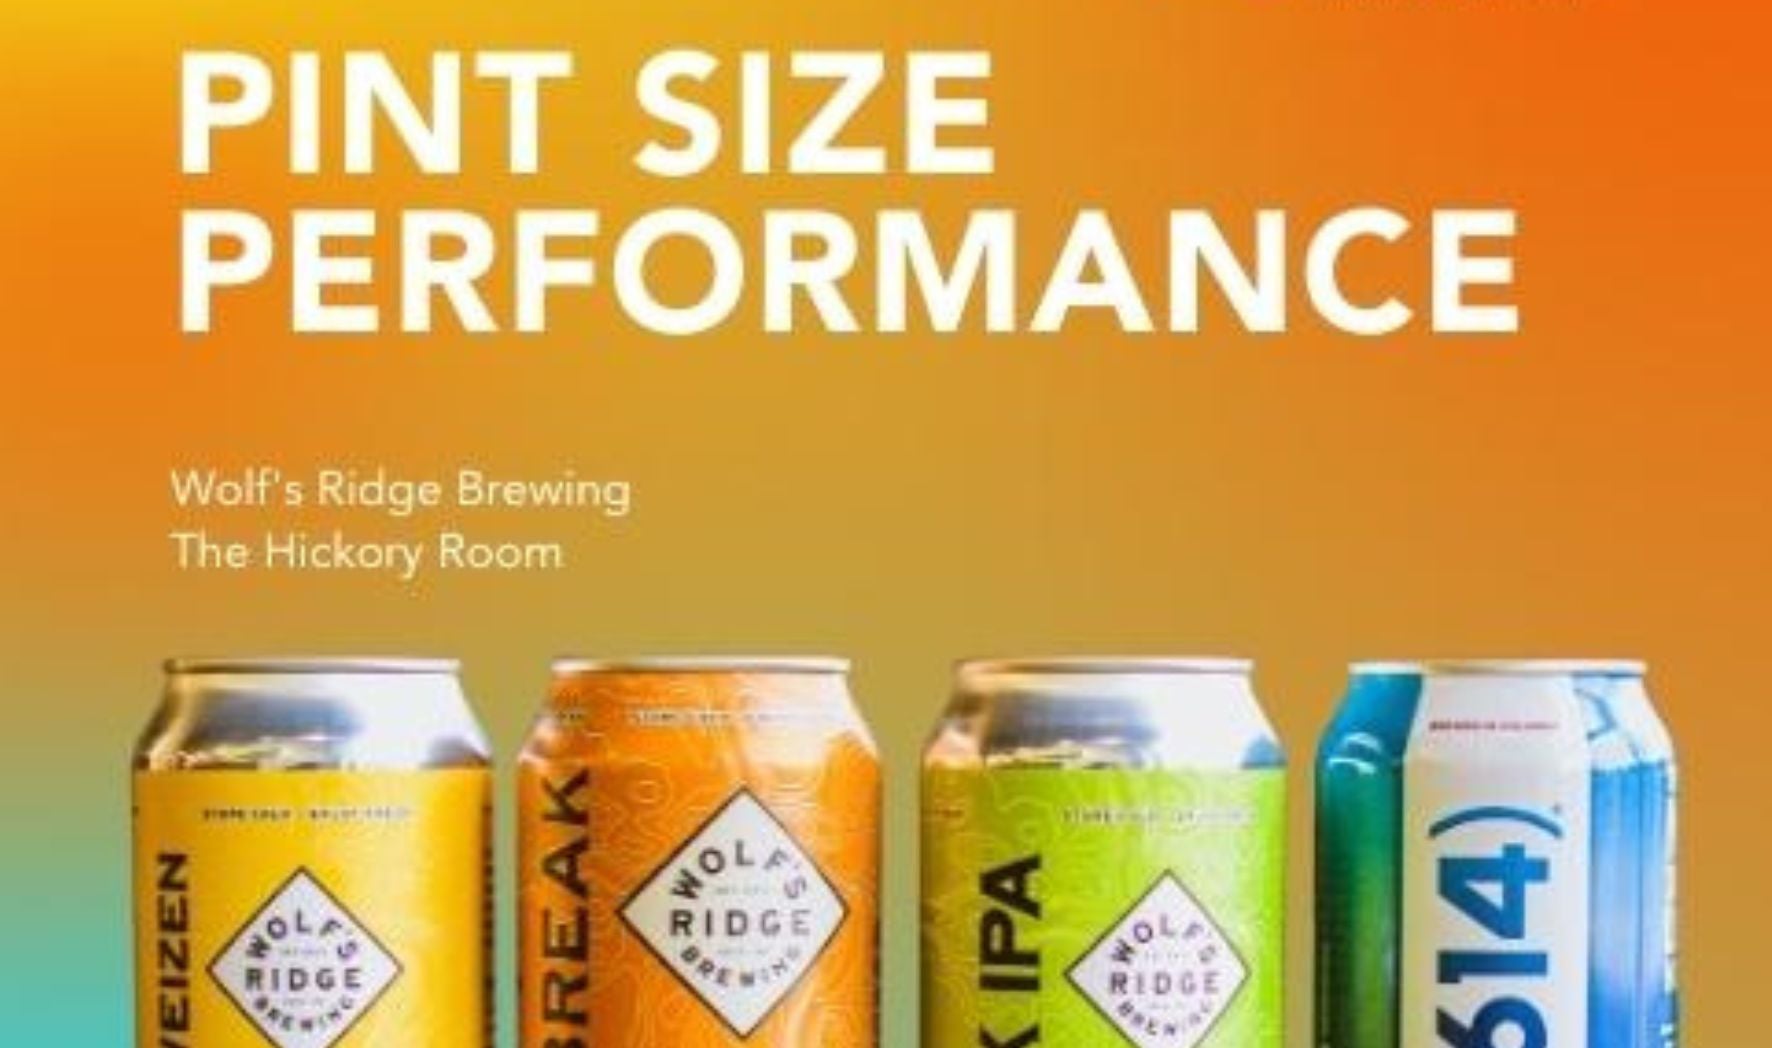 More Info for Pint Size Performance